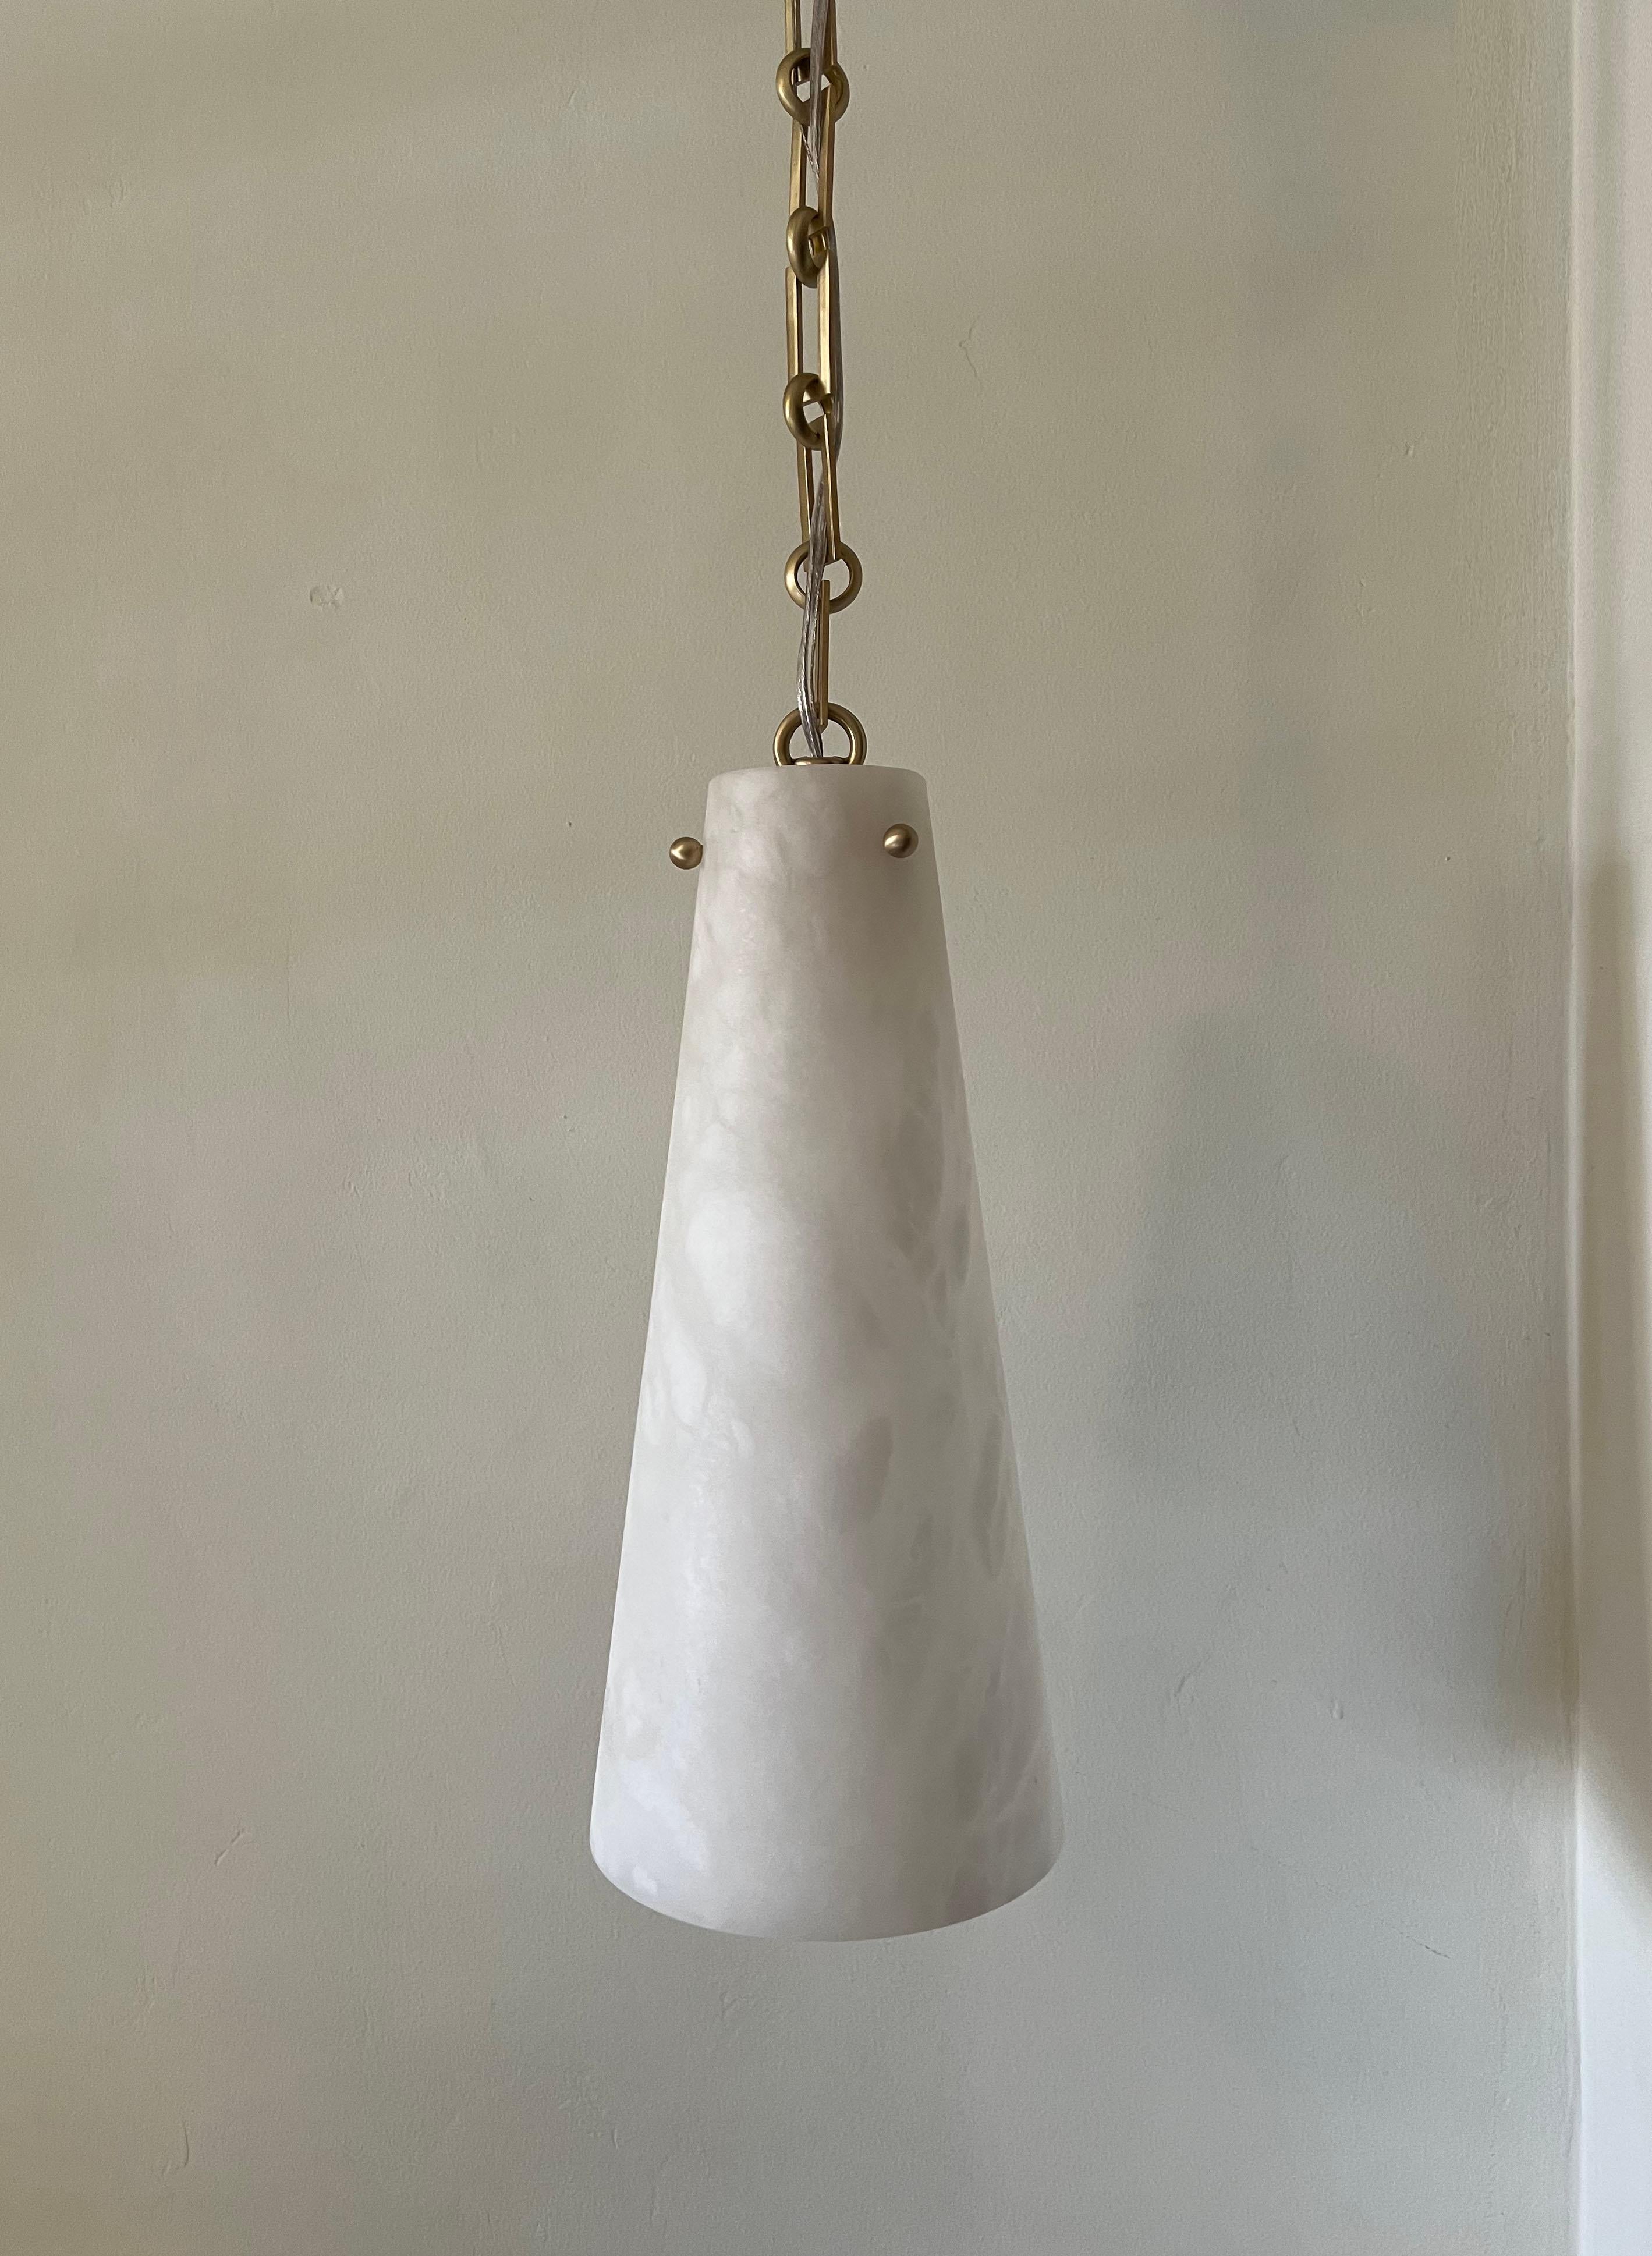 Blackened Contemporary Lucca Pendant 202A-1S in Alabaster by Orphan Work, 2021 For Sale